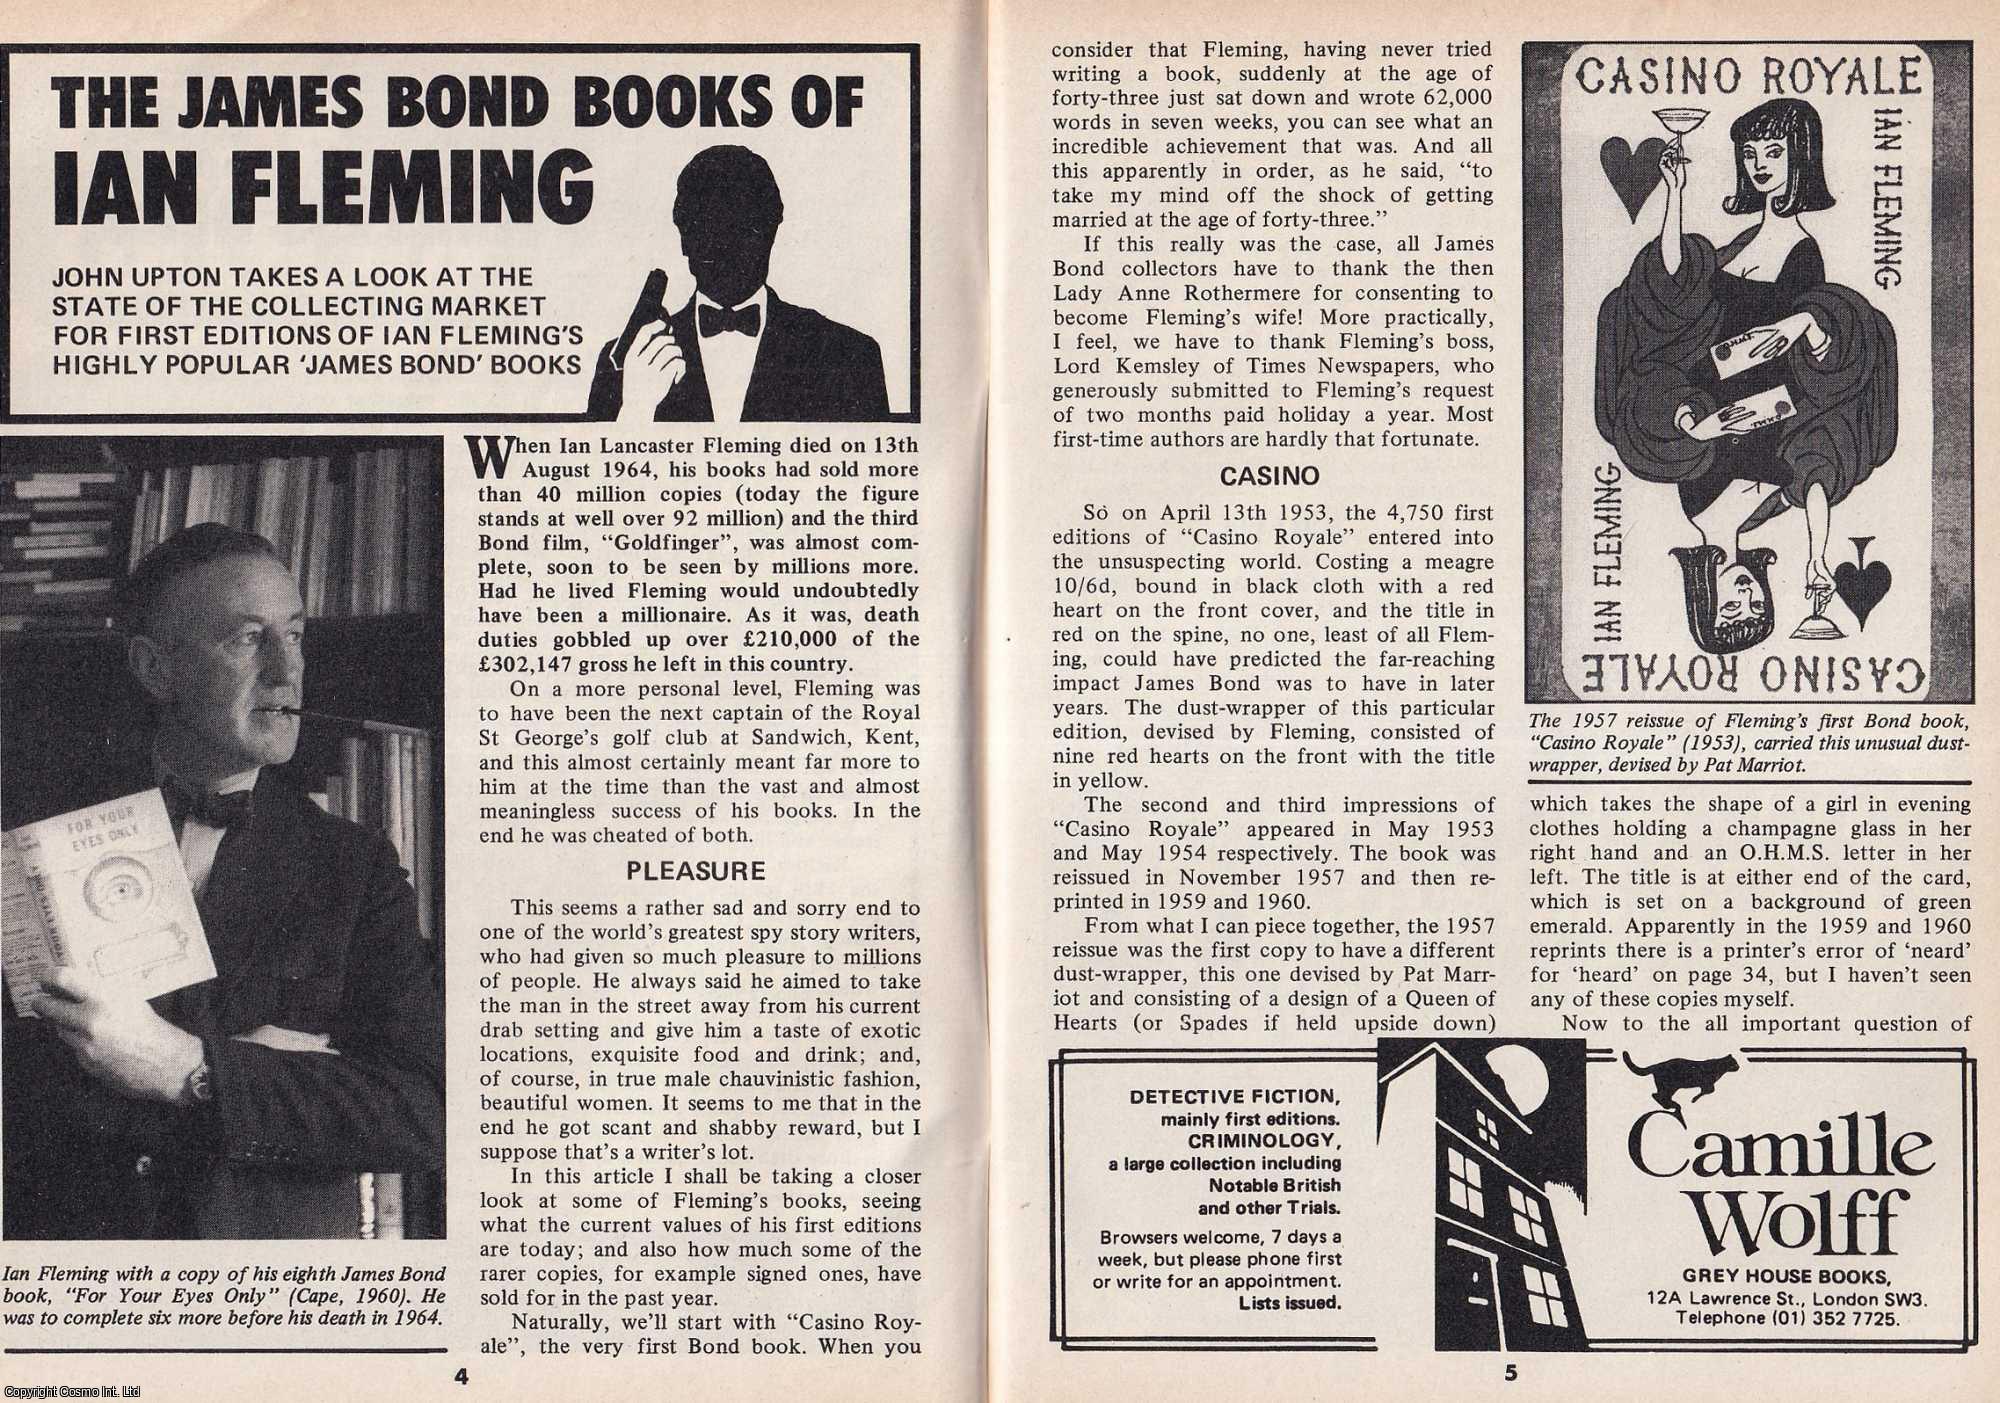 John Upton - The James Bond Books of Ian Fleming. The Collecting Market for First Editions of Ian Fleming's Highly Popular James Bond Books. This is an original article separated from an issue of The Book & Magazine Collector publication.